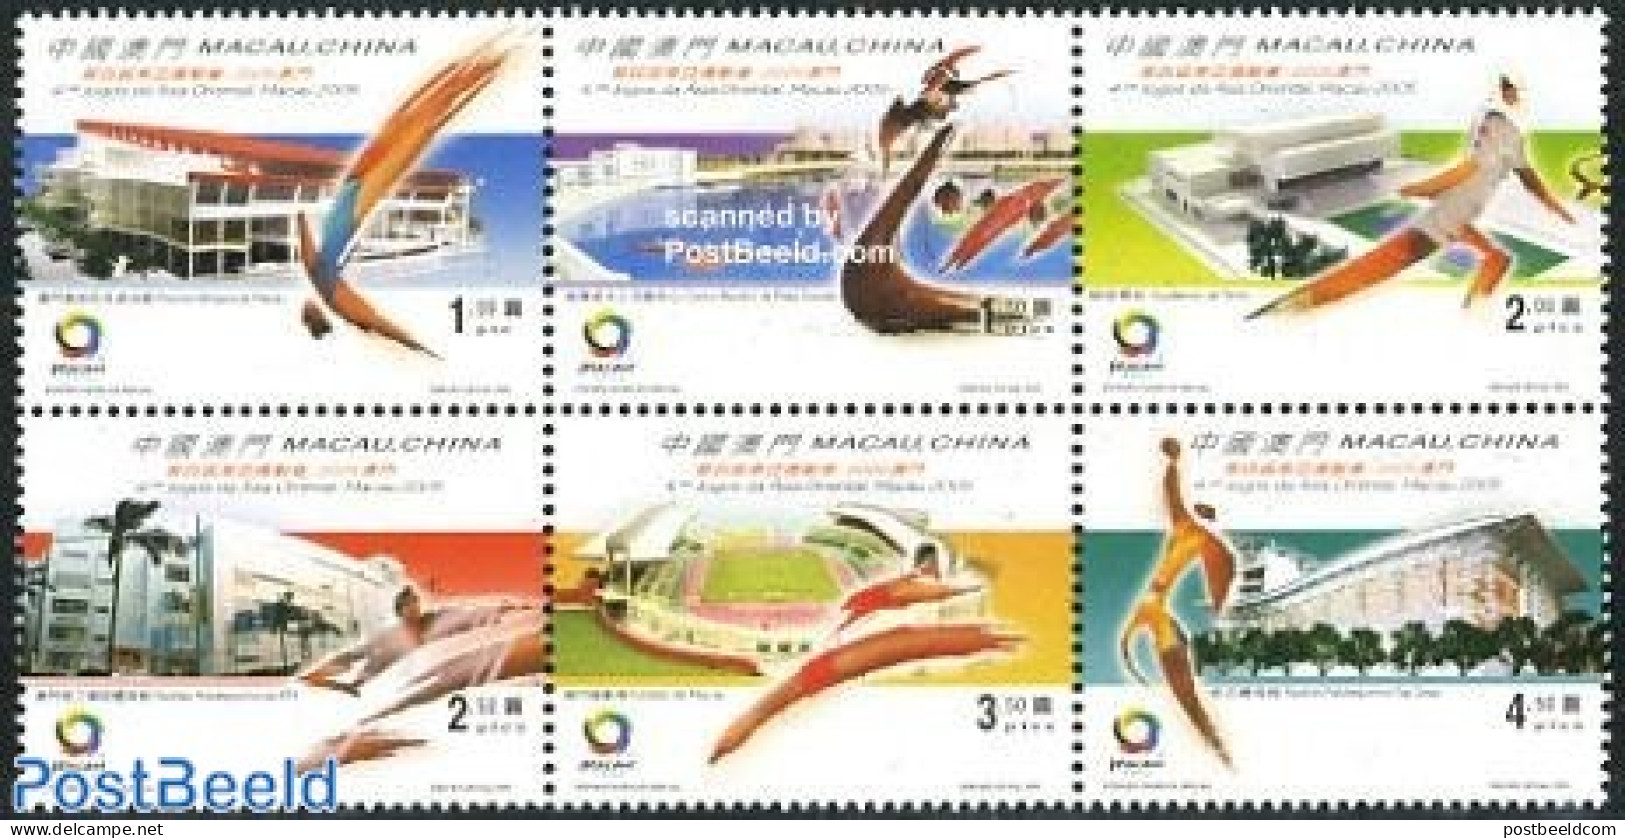 Macao 2005 East Asia Games 6v [++], Mint NH, Sport - Sport (other And Mixed) - Unused Stamps